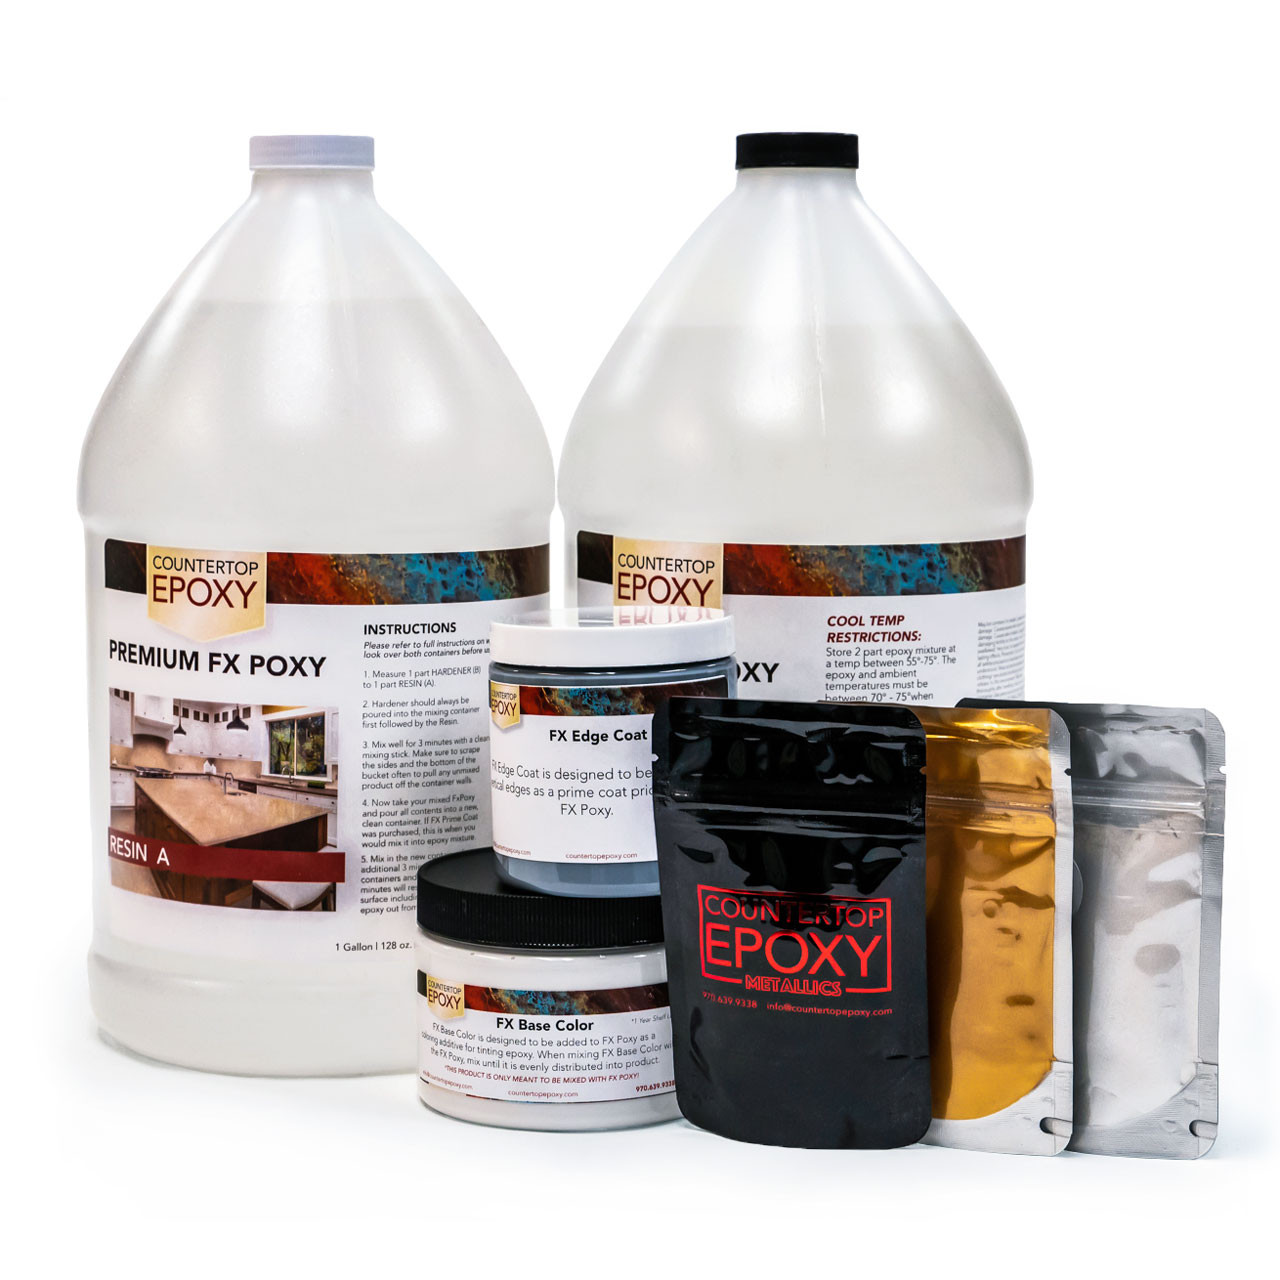 https://cdn11.bigcommerce.com/s-7utbg4/images/stencil/1280x1280/products/176/845/create-your-own-countertop-epoxy-kit__75728.1569093172.jpg?c=2